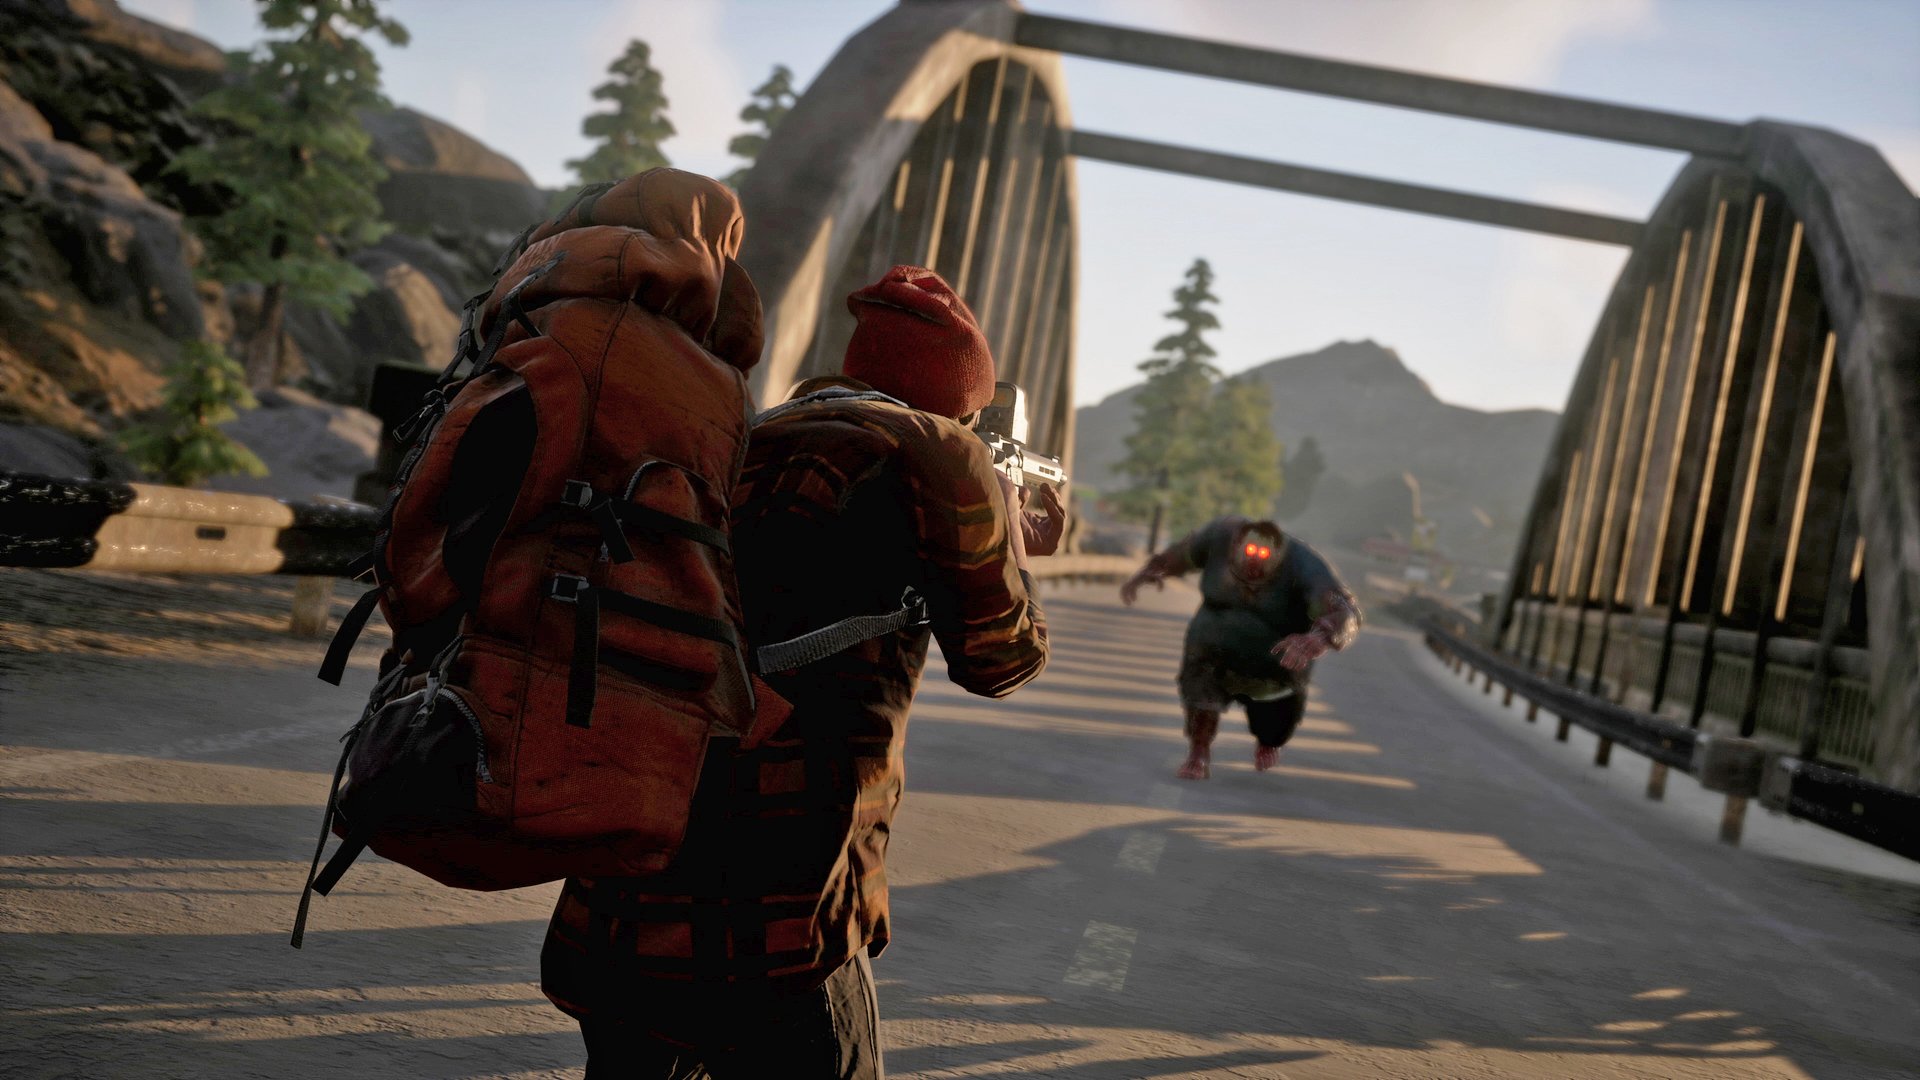 Microsoft Confirms Its Intentions To Make State of Decay 3